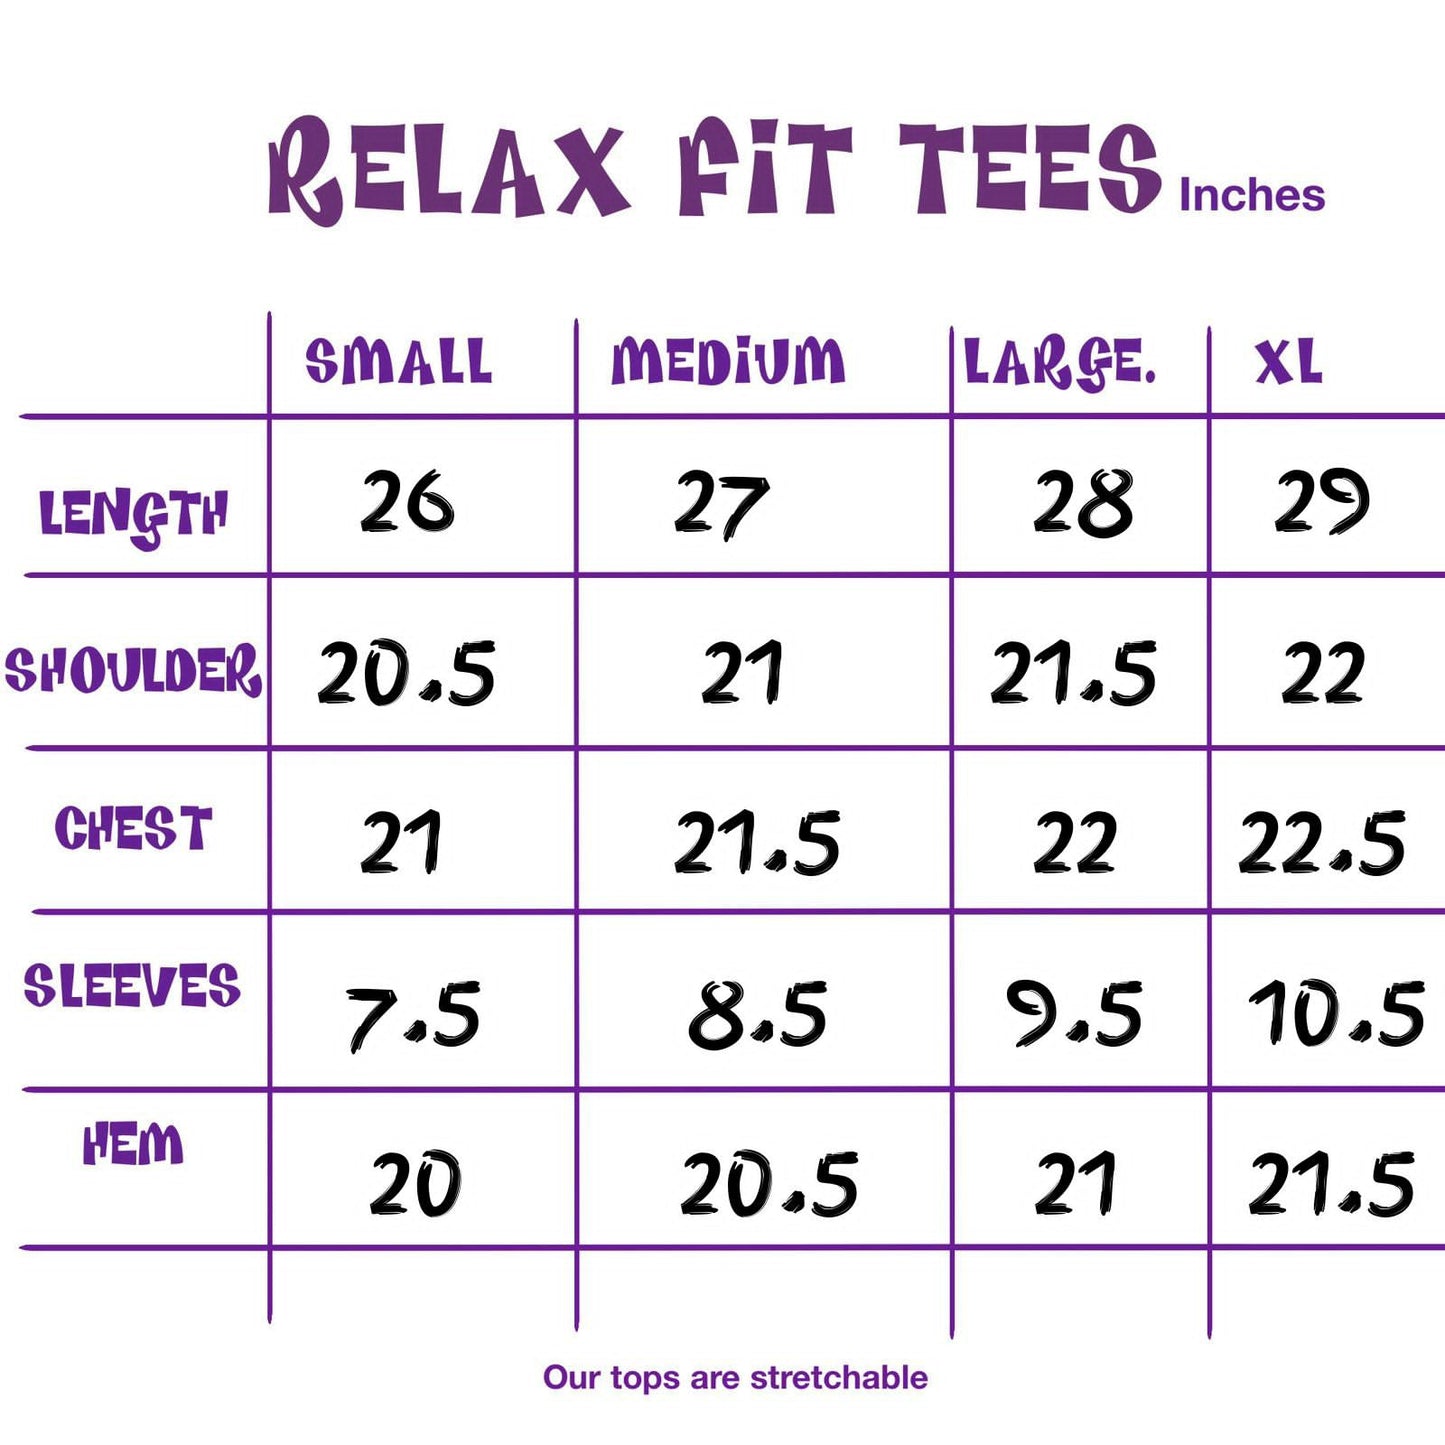 Miracle Relax Fit Tee